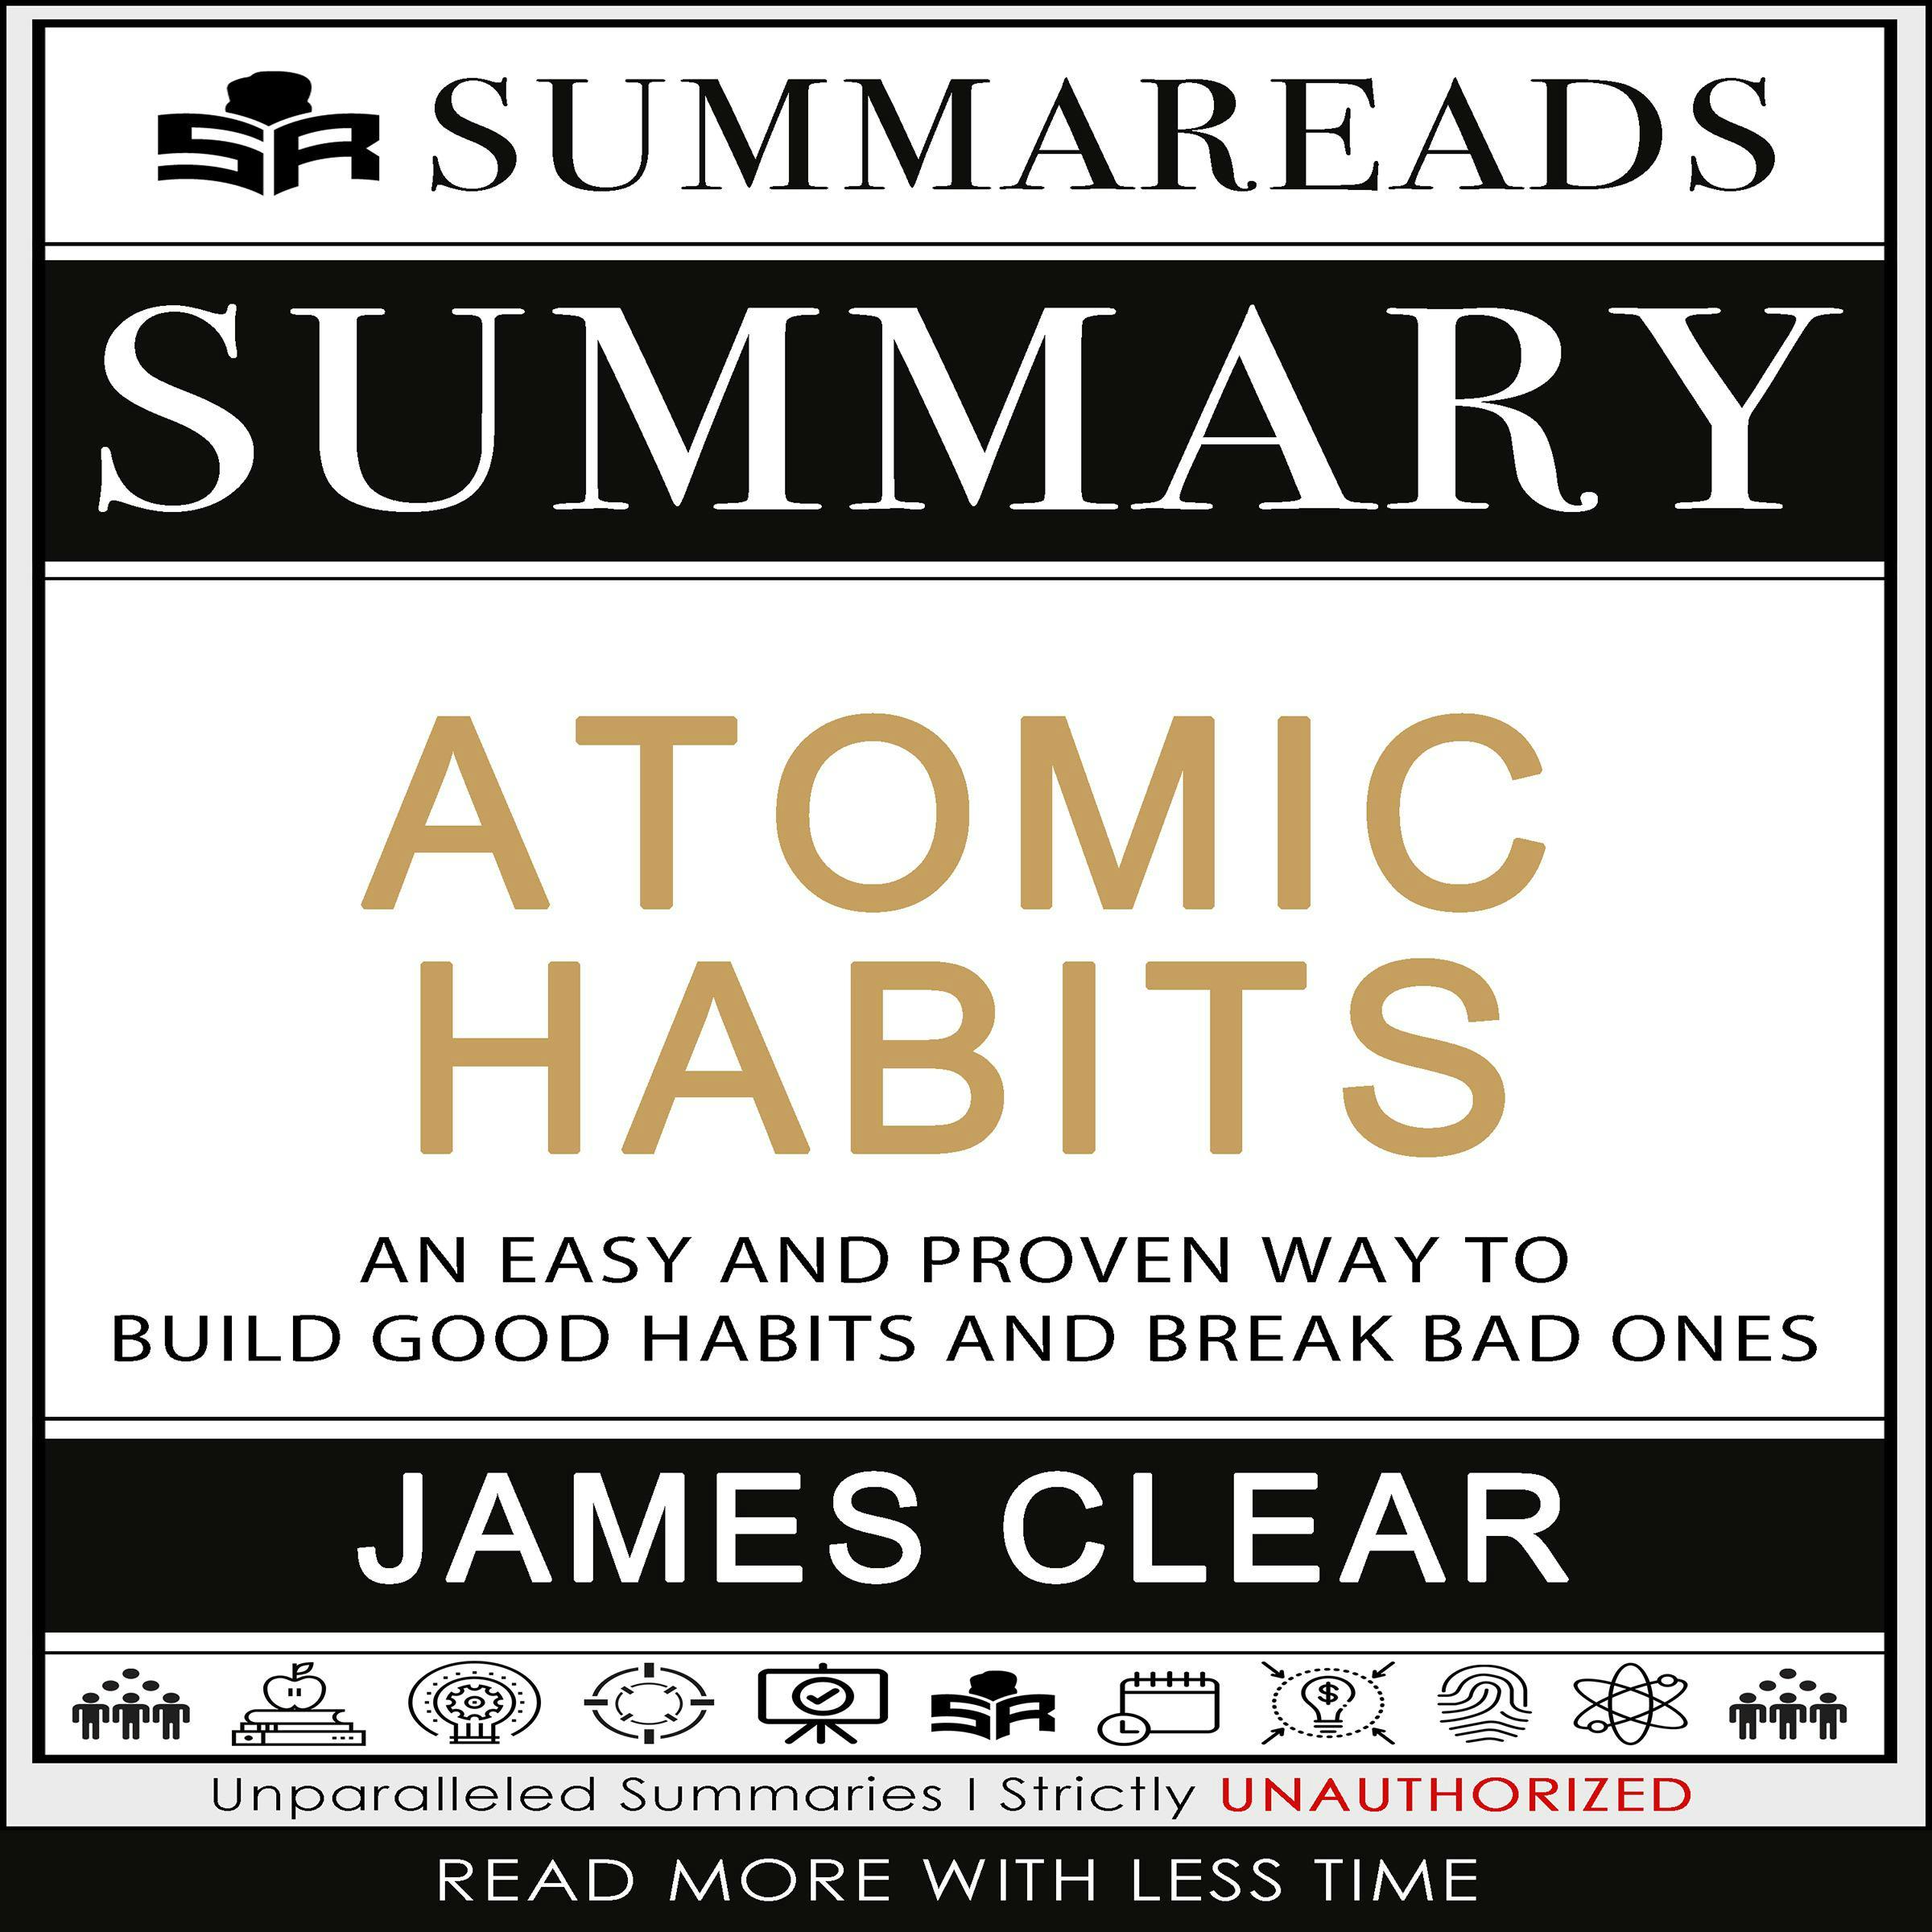 Atomic Habits: The Four Laws You Need to Master to Build Good Habits and  Break Bad Ones [Book Notes] 